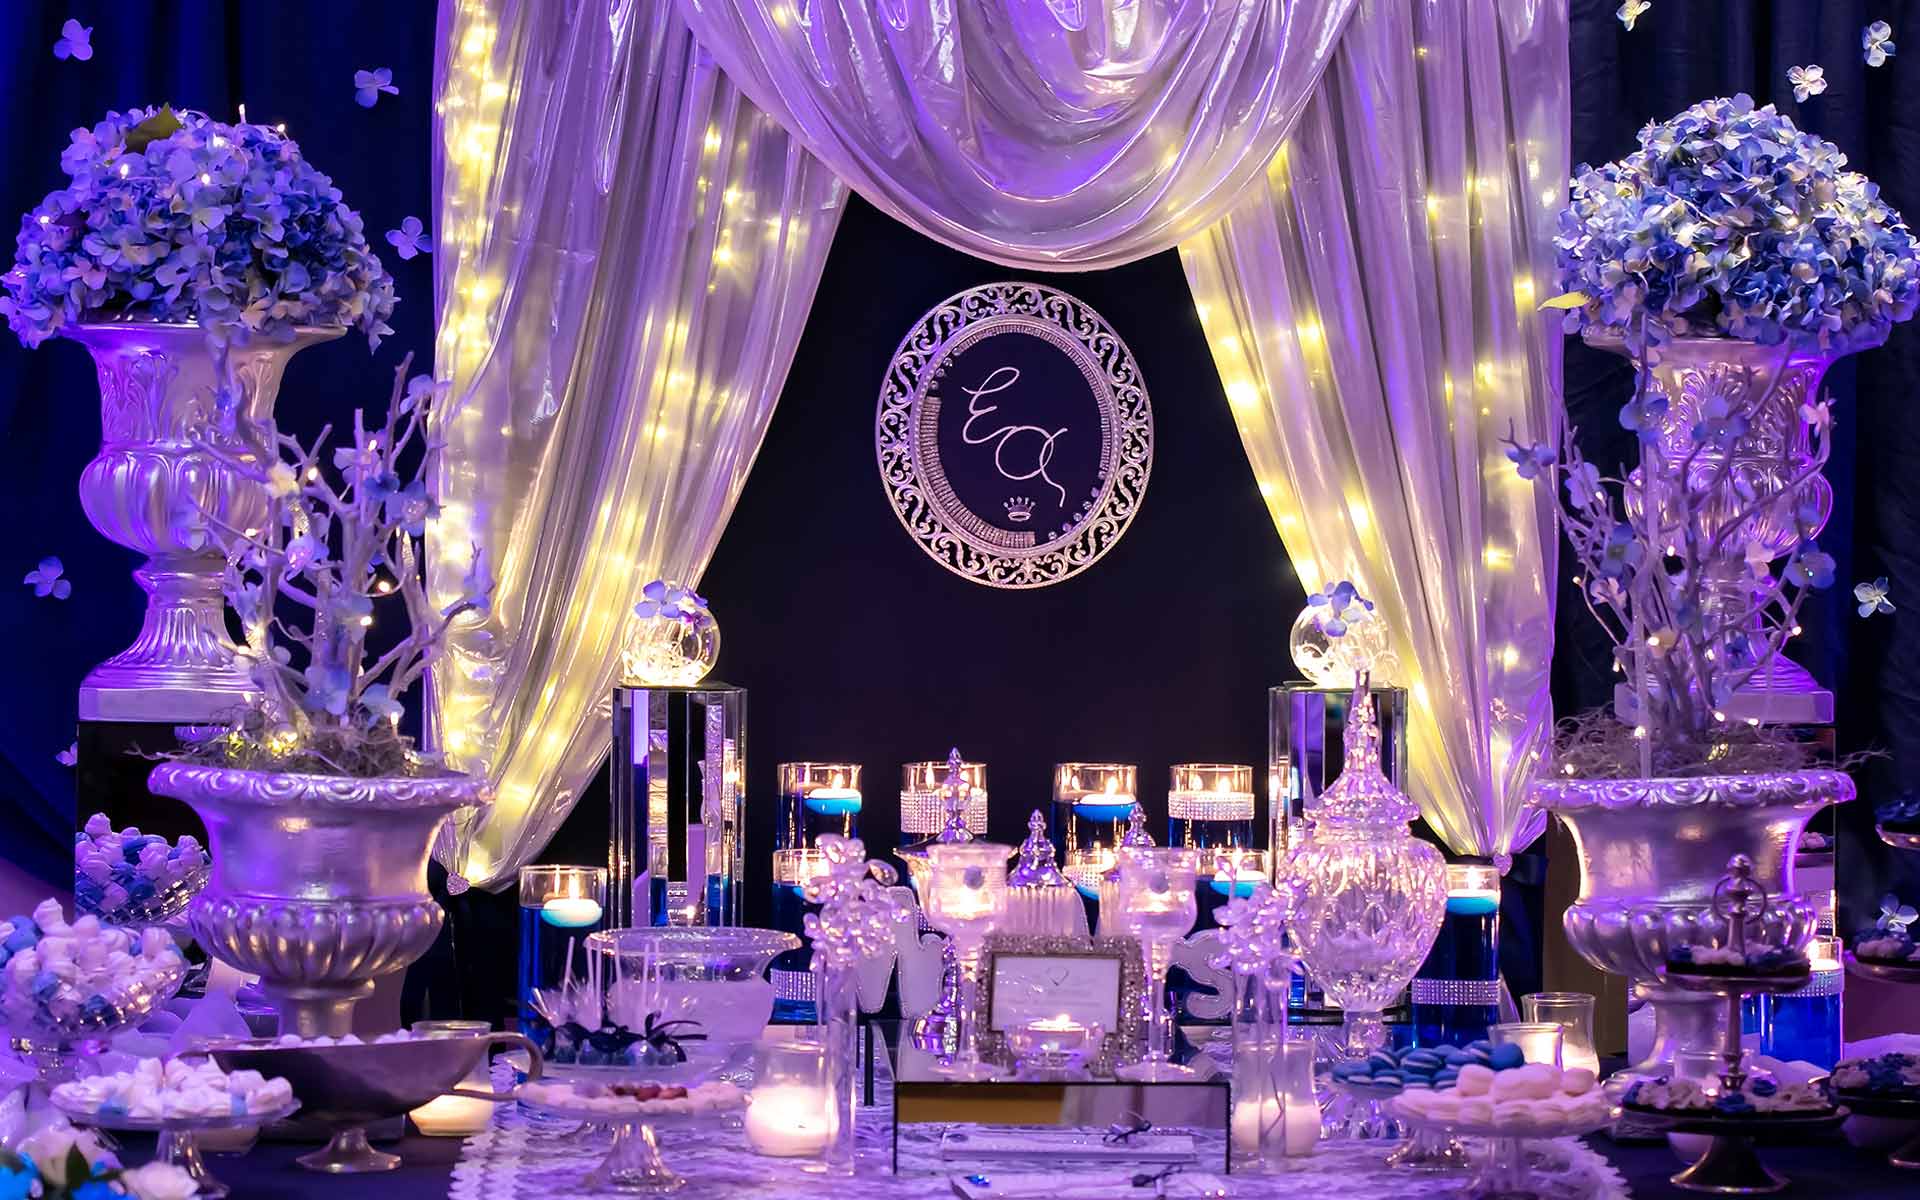 Royal wedding guest book tables from Rogdaki Events Trademark